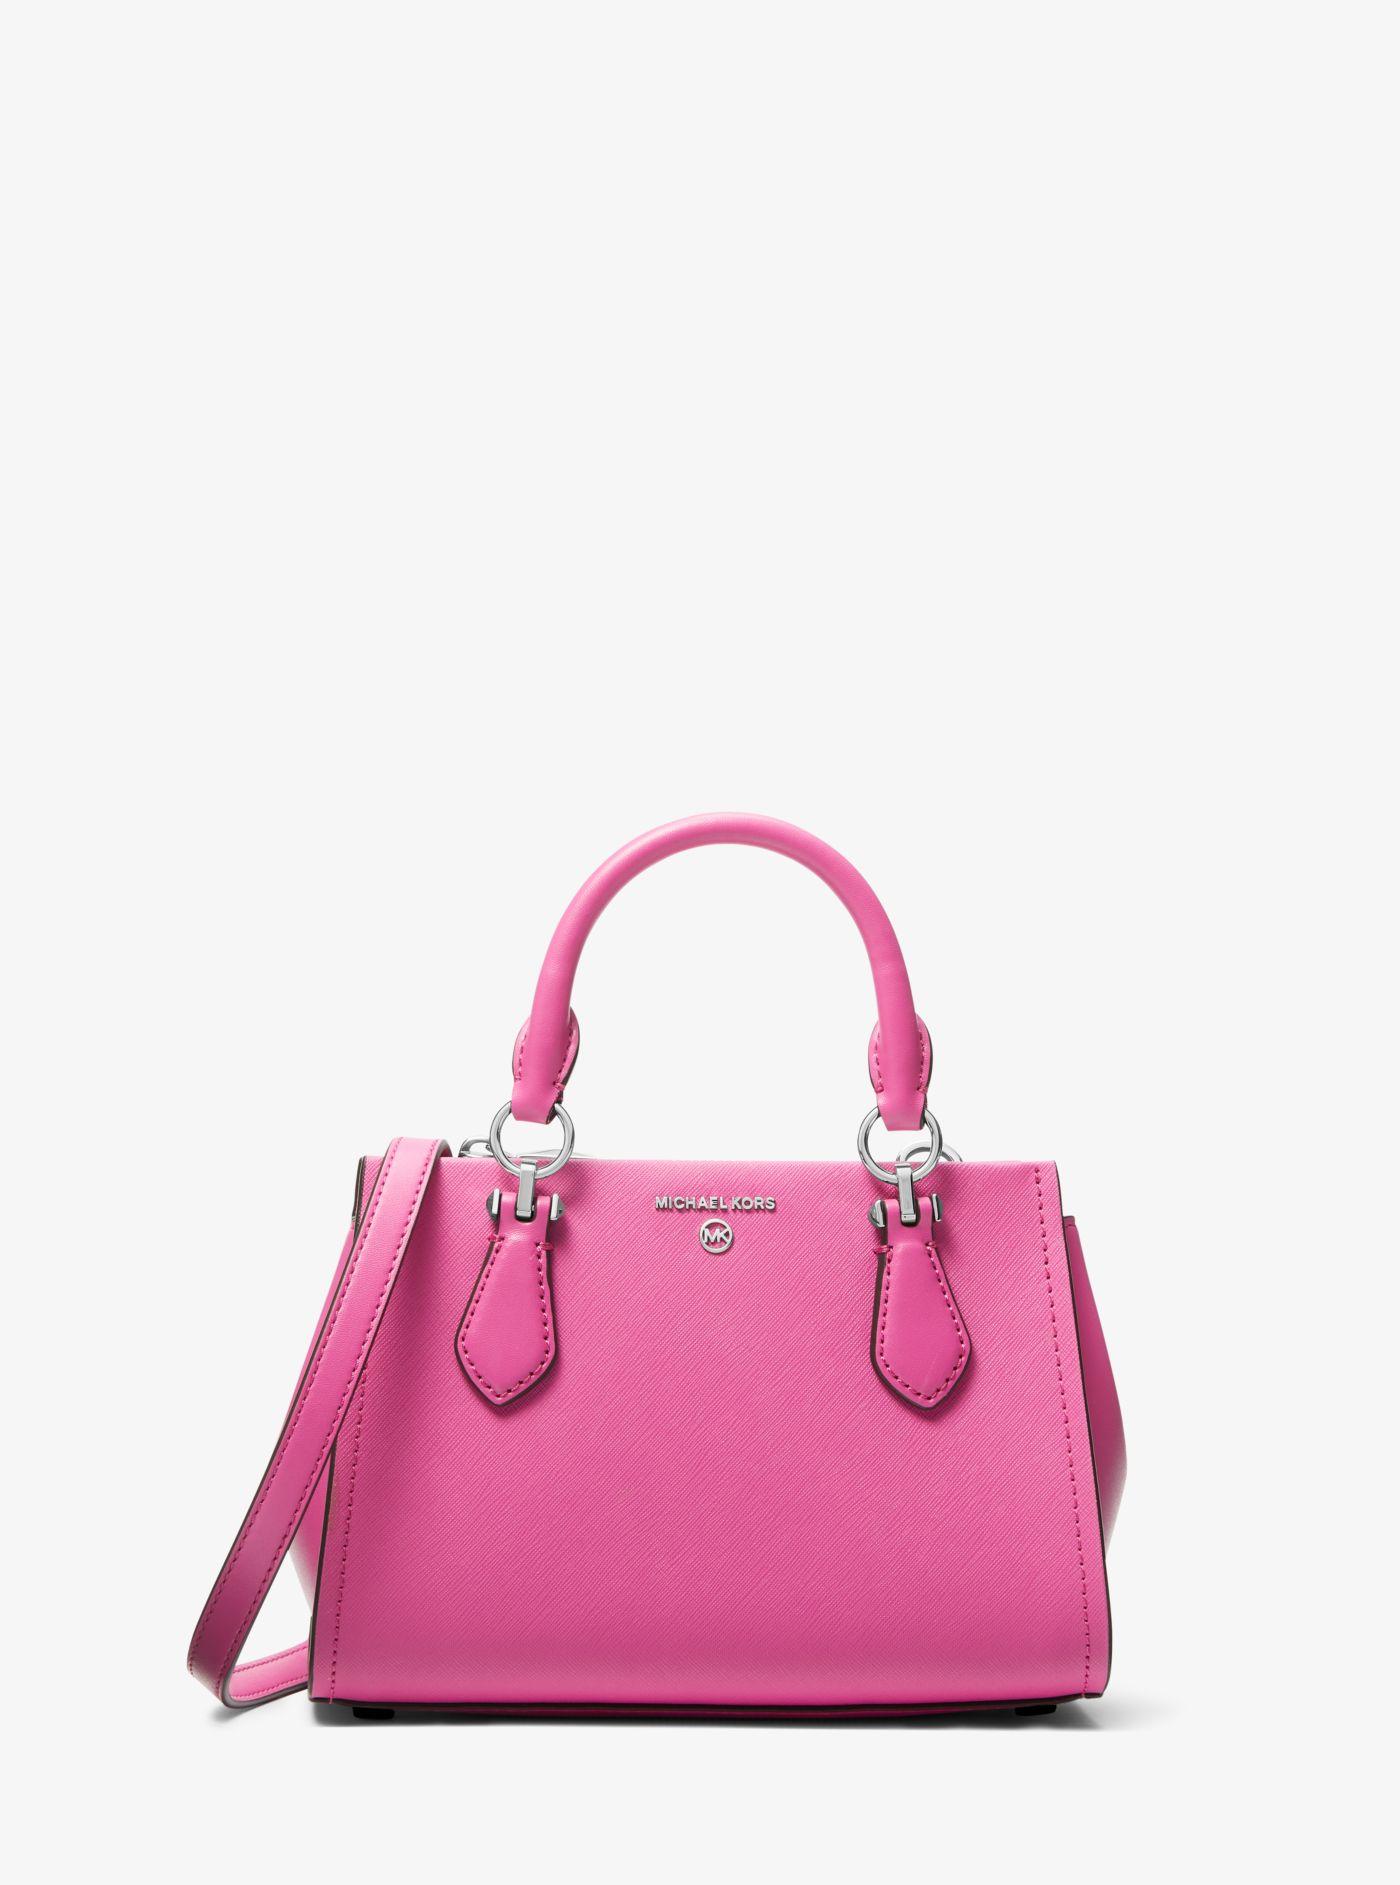 Michael Kors Marilyn Small Saffiano Leather Crossbody Bag in Pink | Lyst